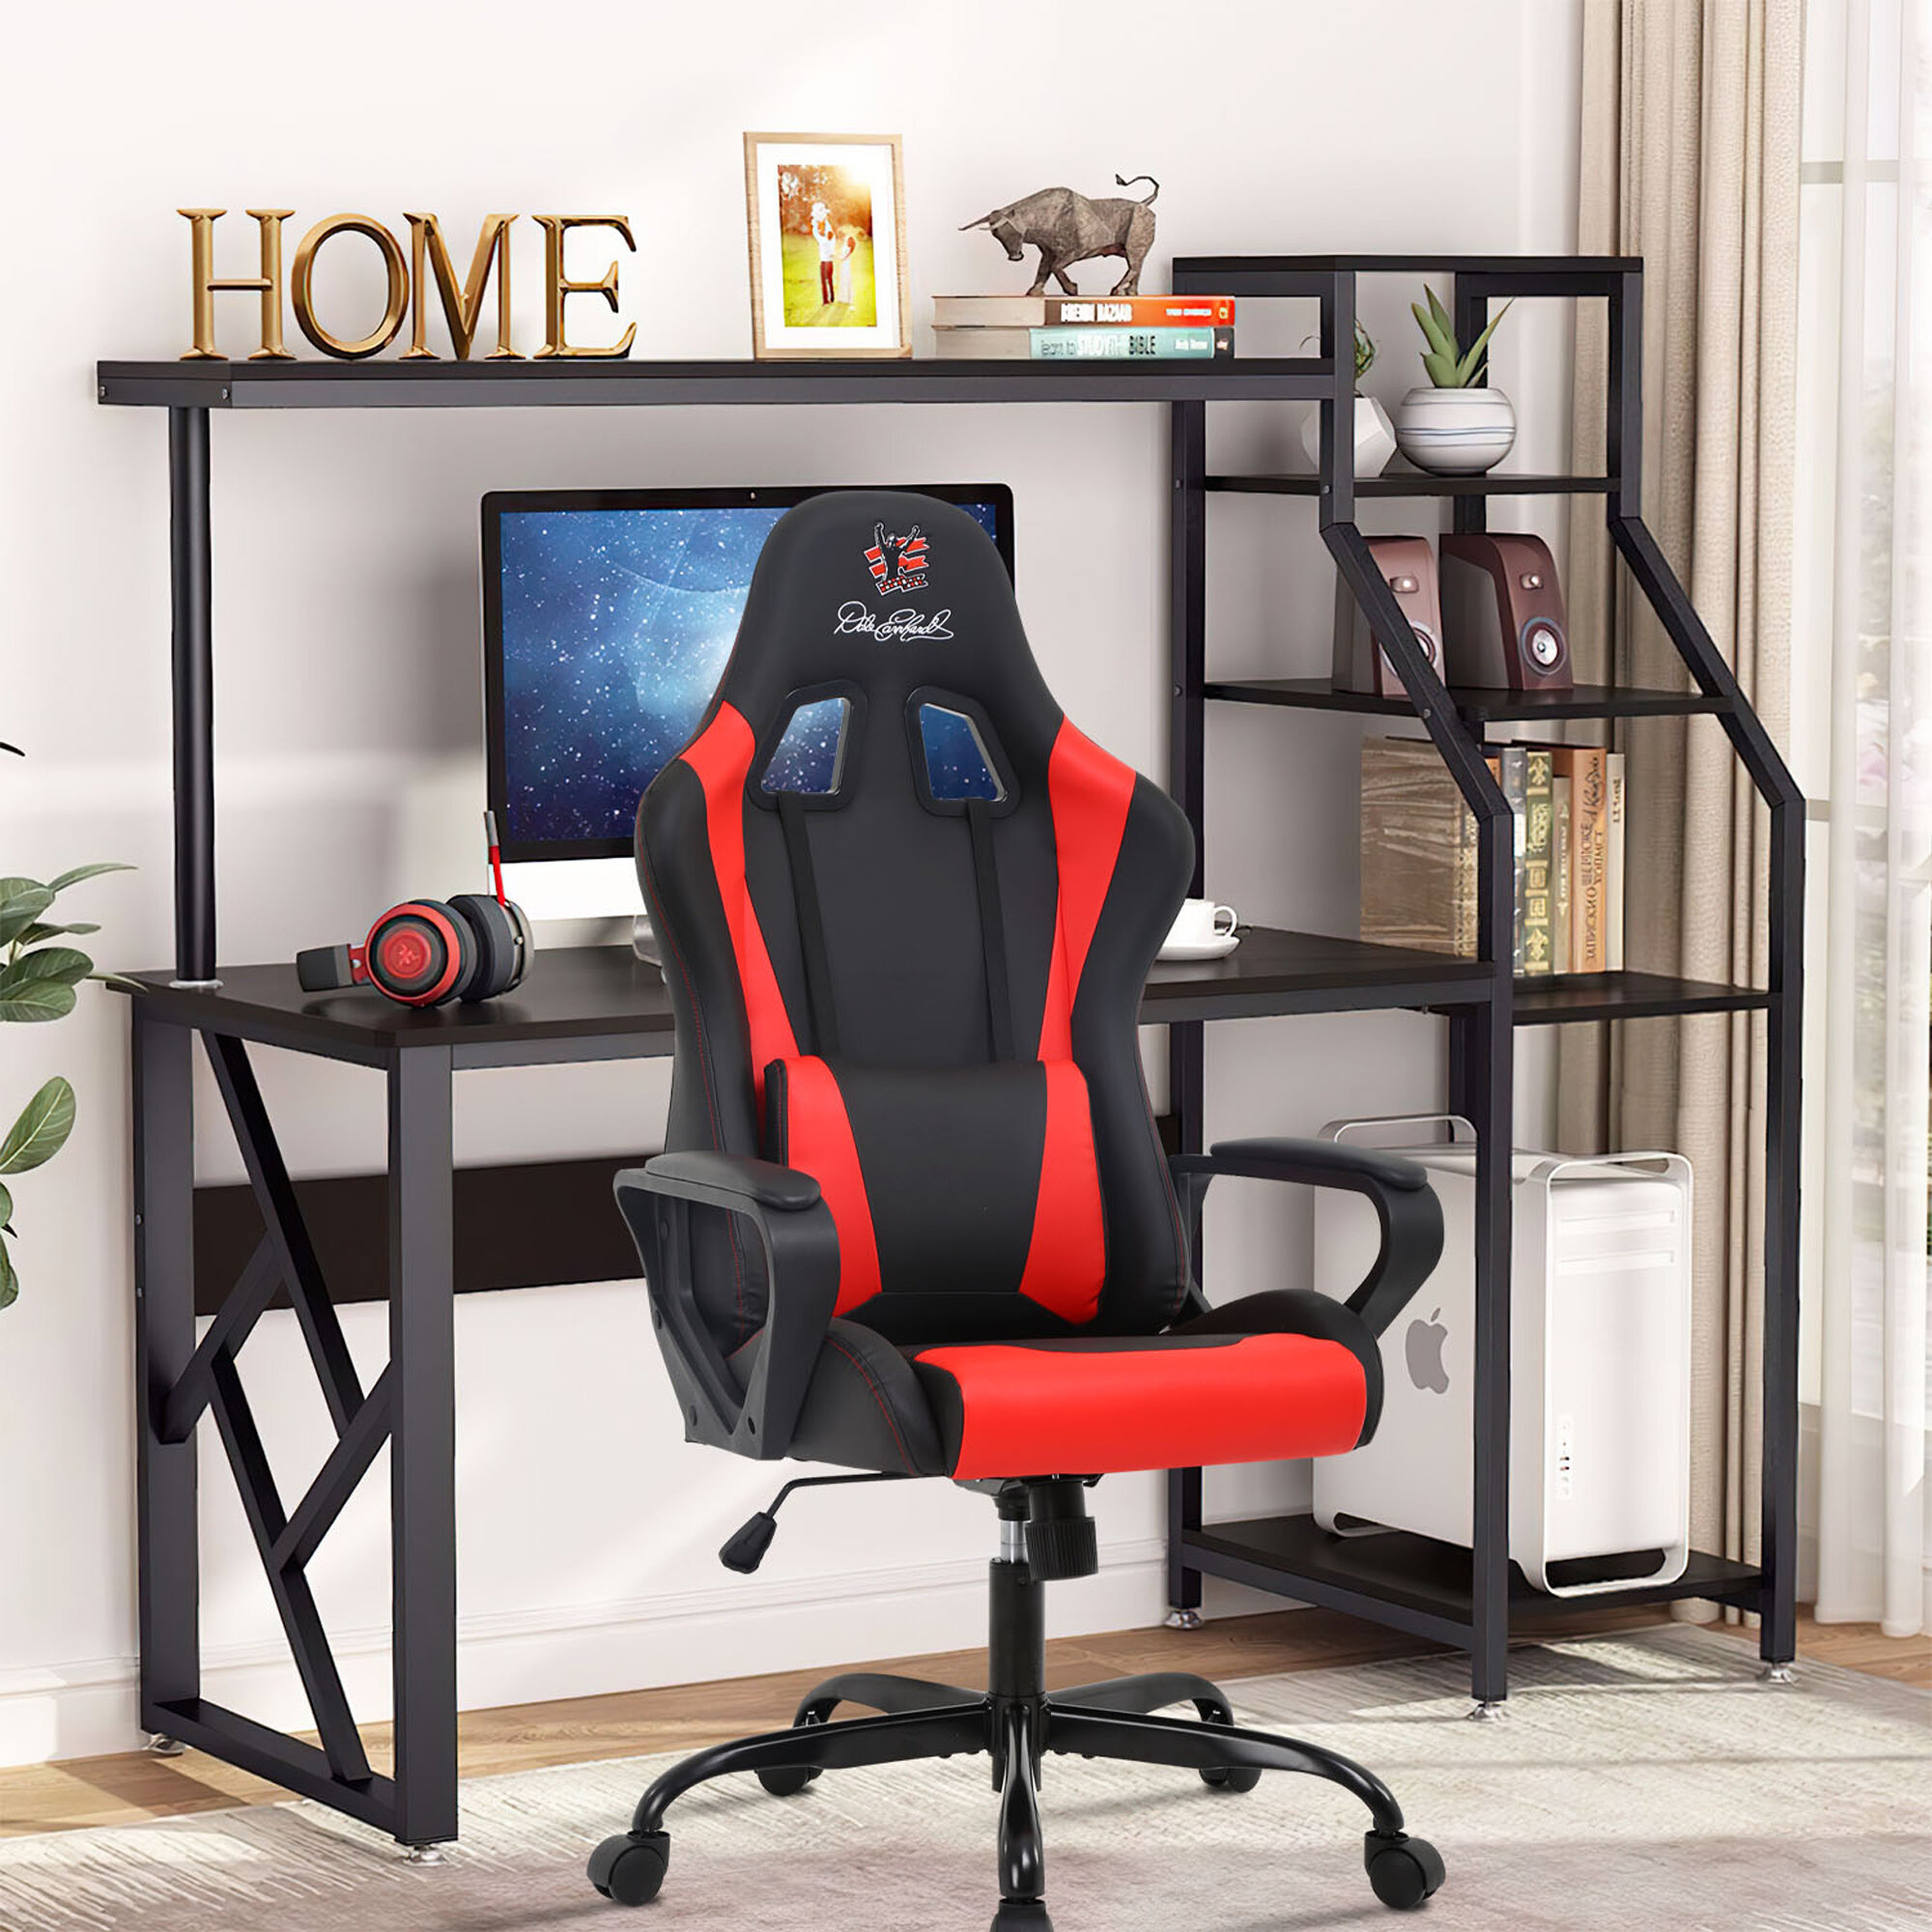 Executive Racing Gaming Computer Office Chair Adjustable Swivel Cushioned Chair 